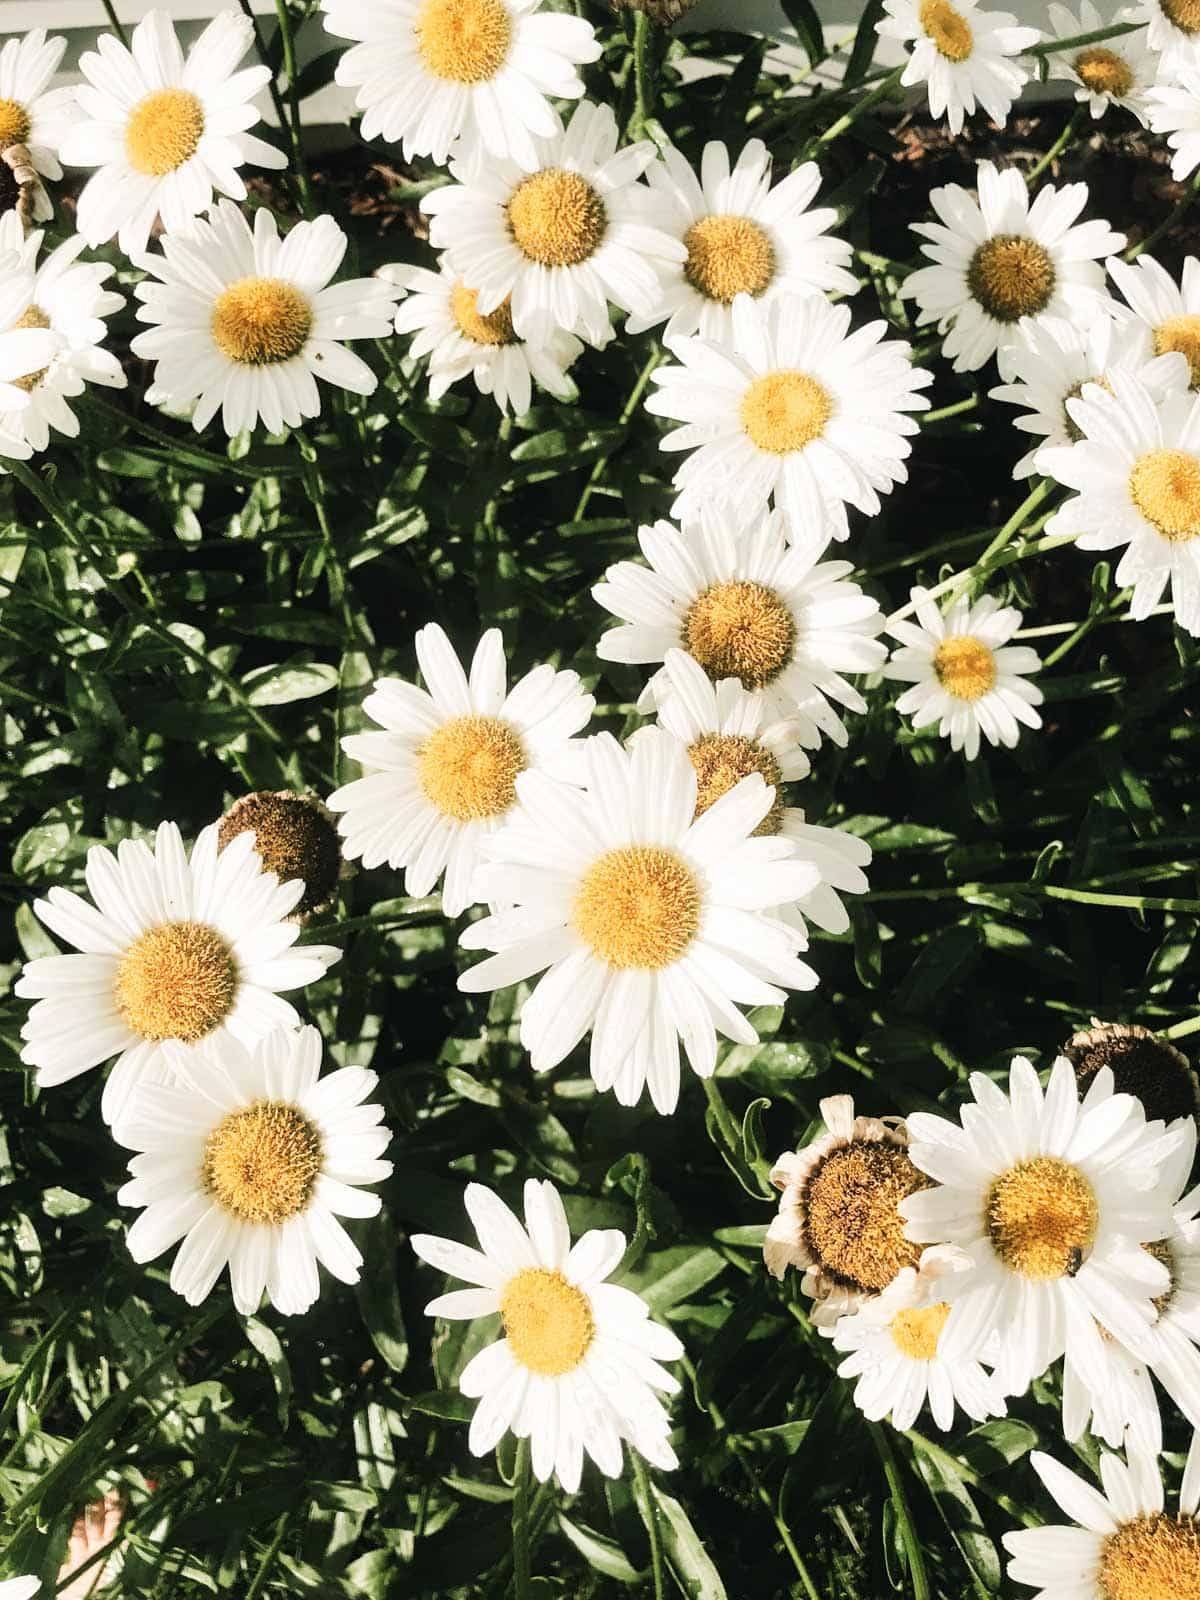 Daisies (white with gold center) close together on a bed of greenery.